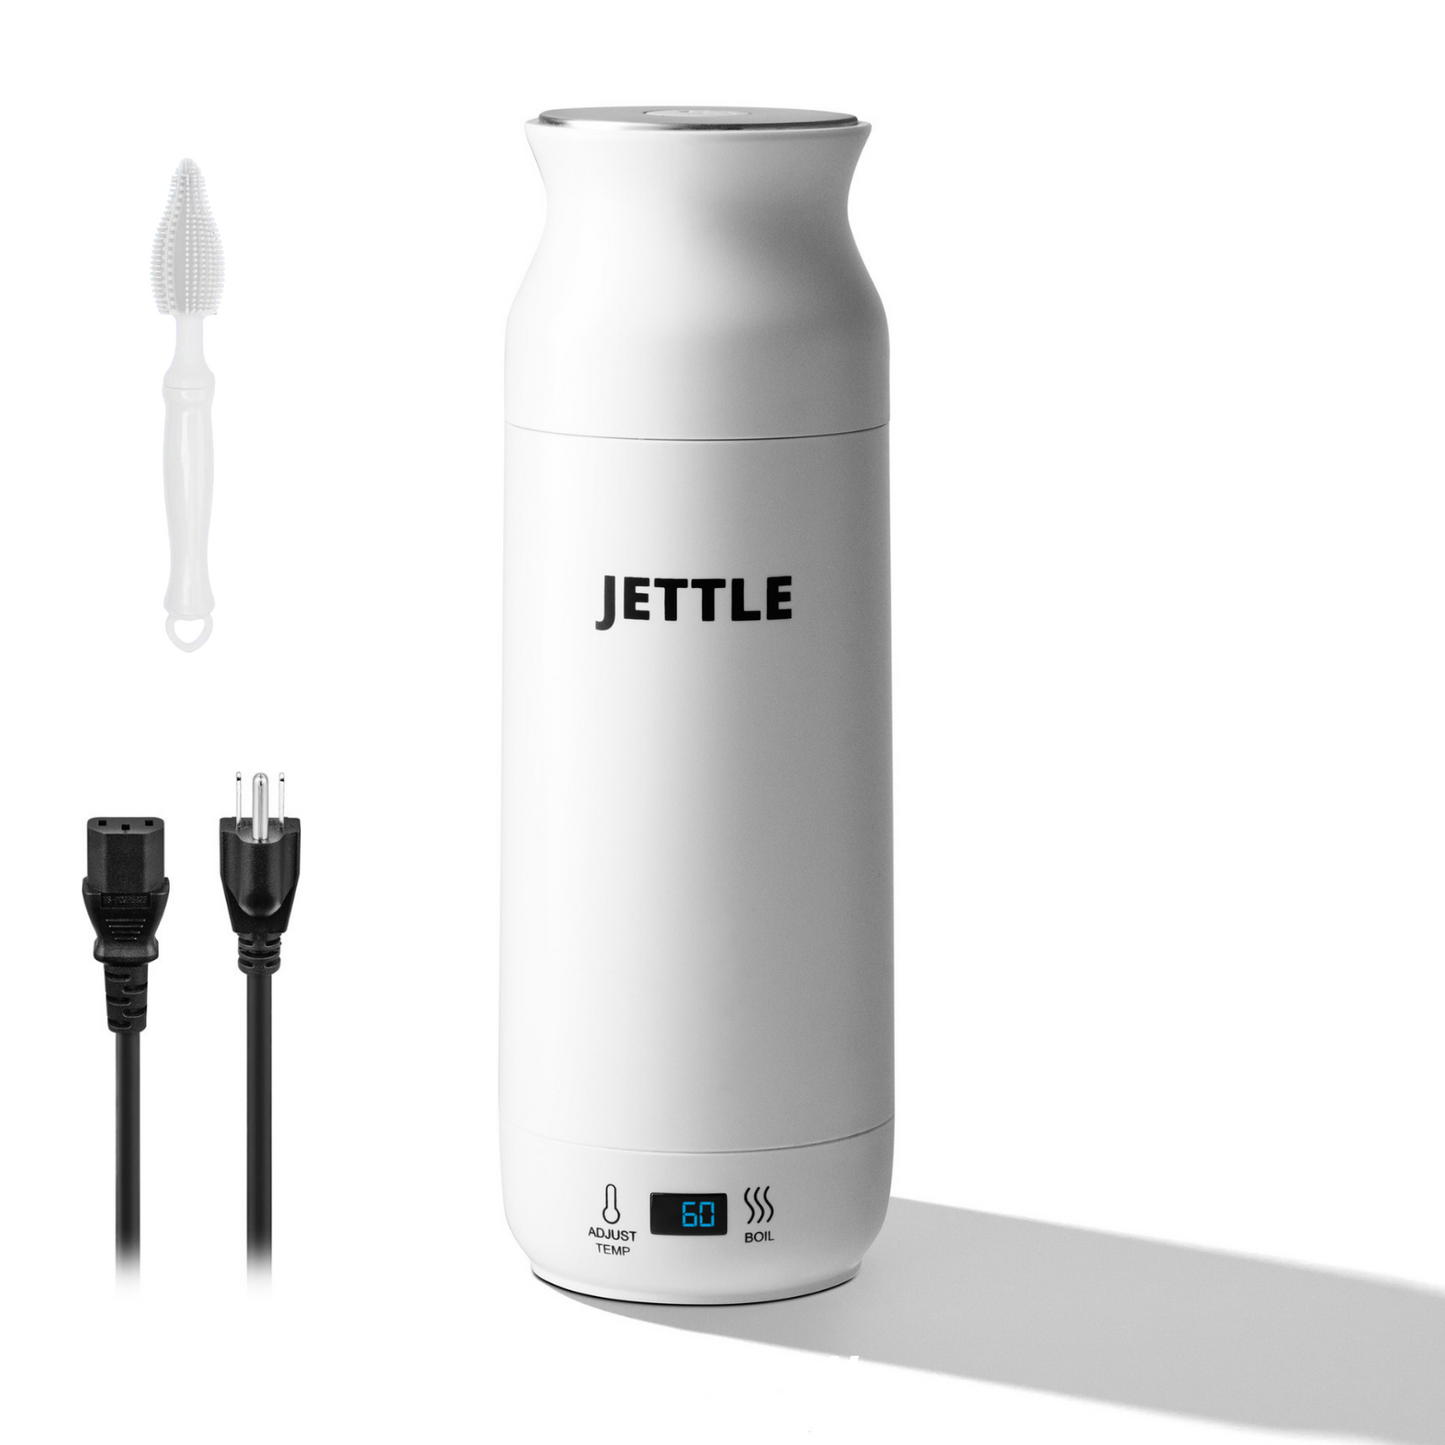 Jettle Electric Kettle - Travel Portable Heater for Coffee, Tea